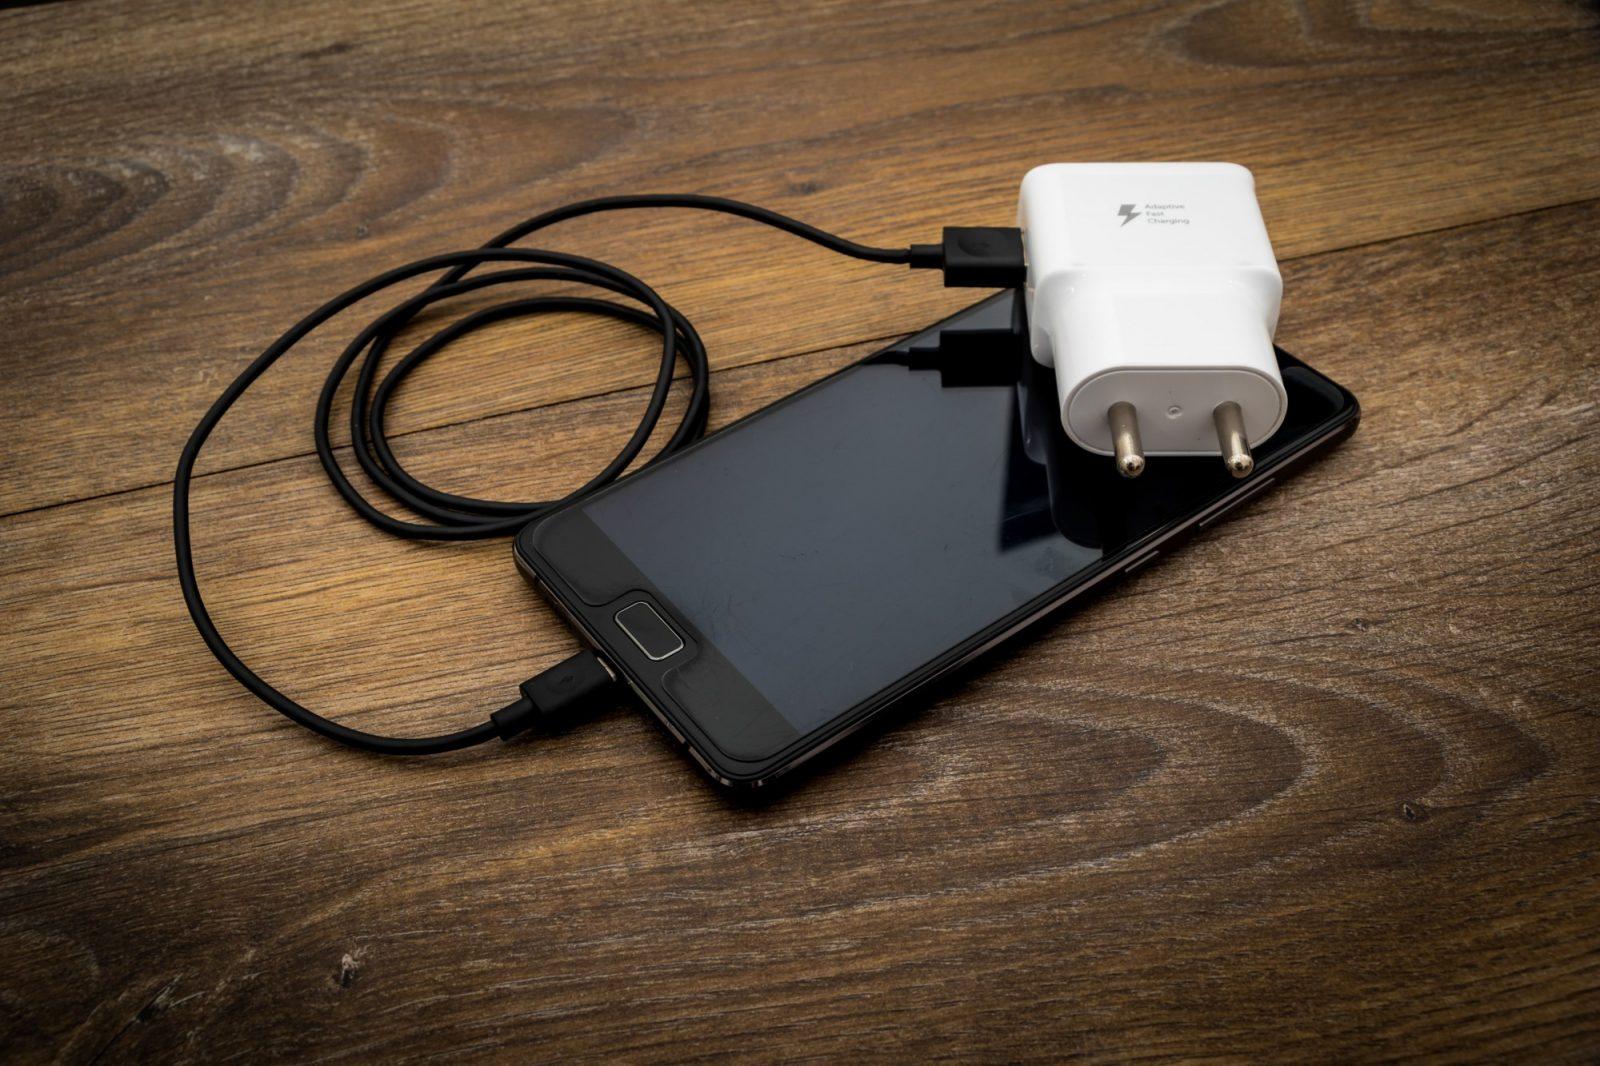 Losing Power: What to Do When Your Phone Won’t Charge